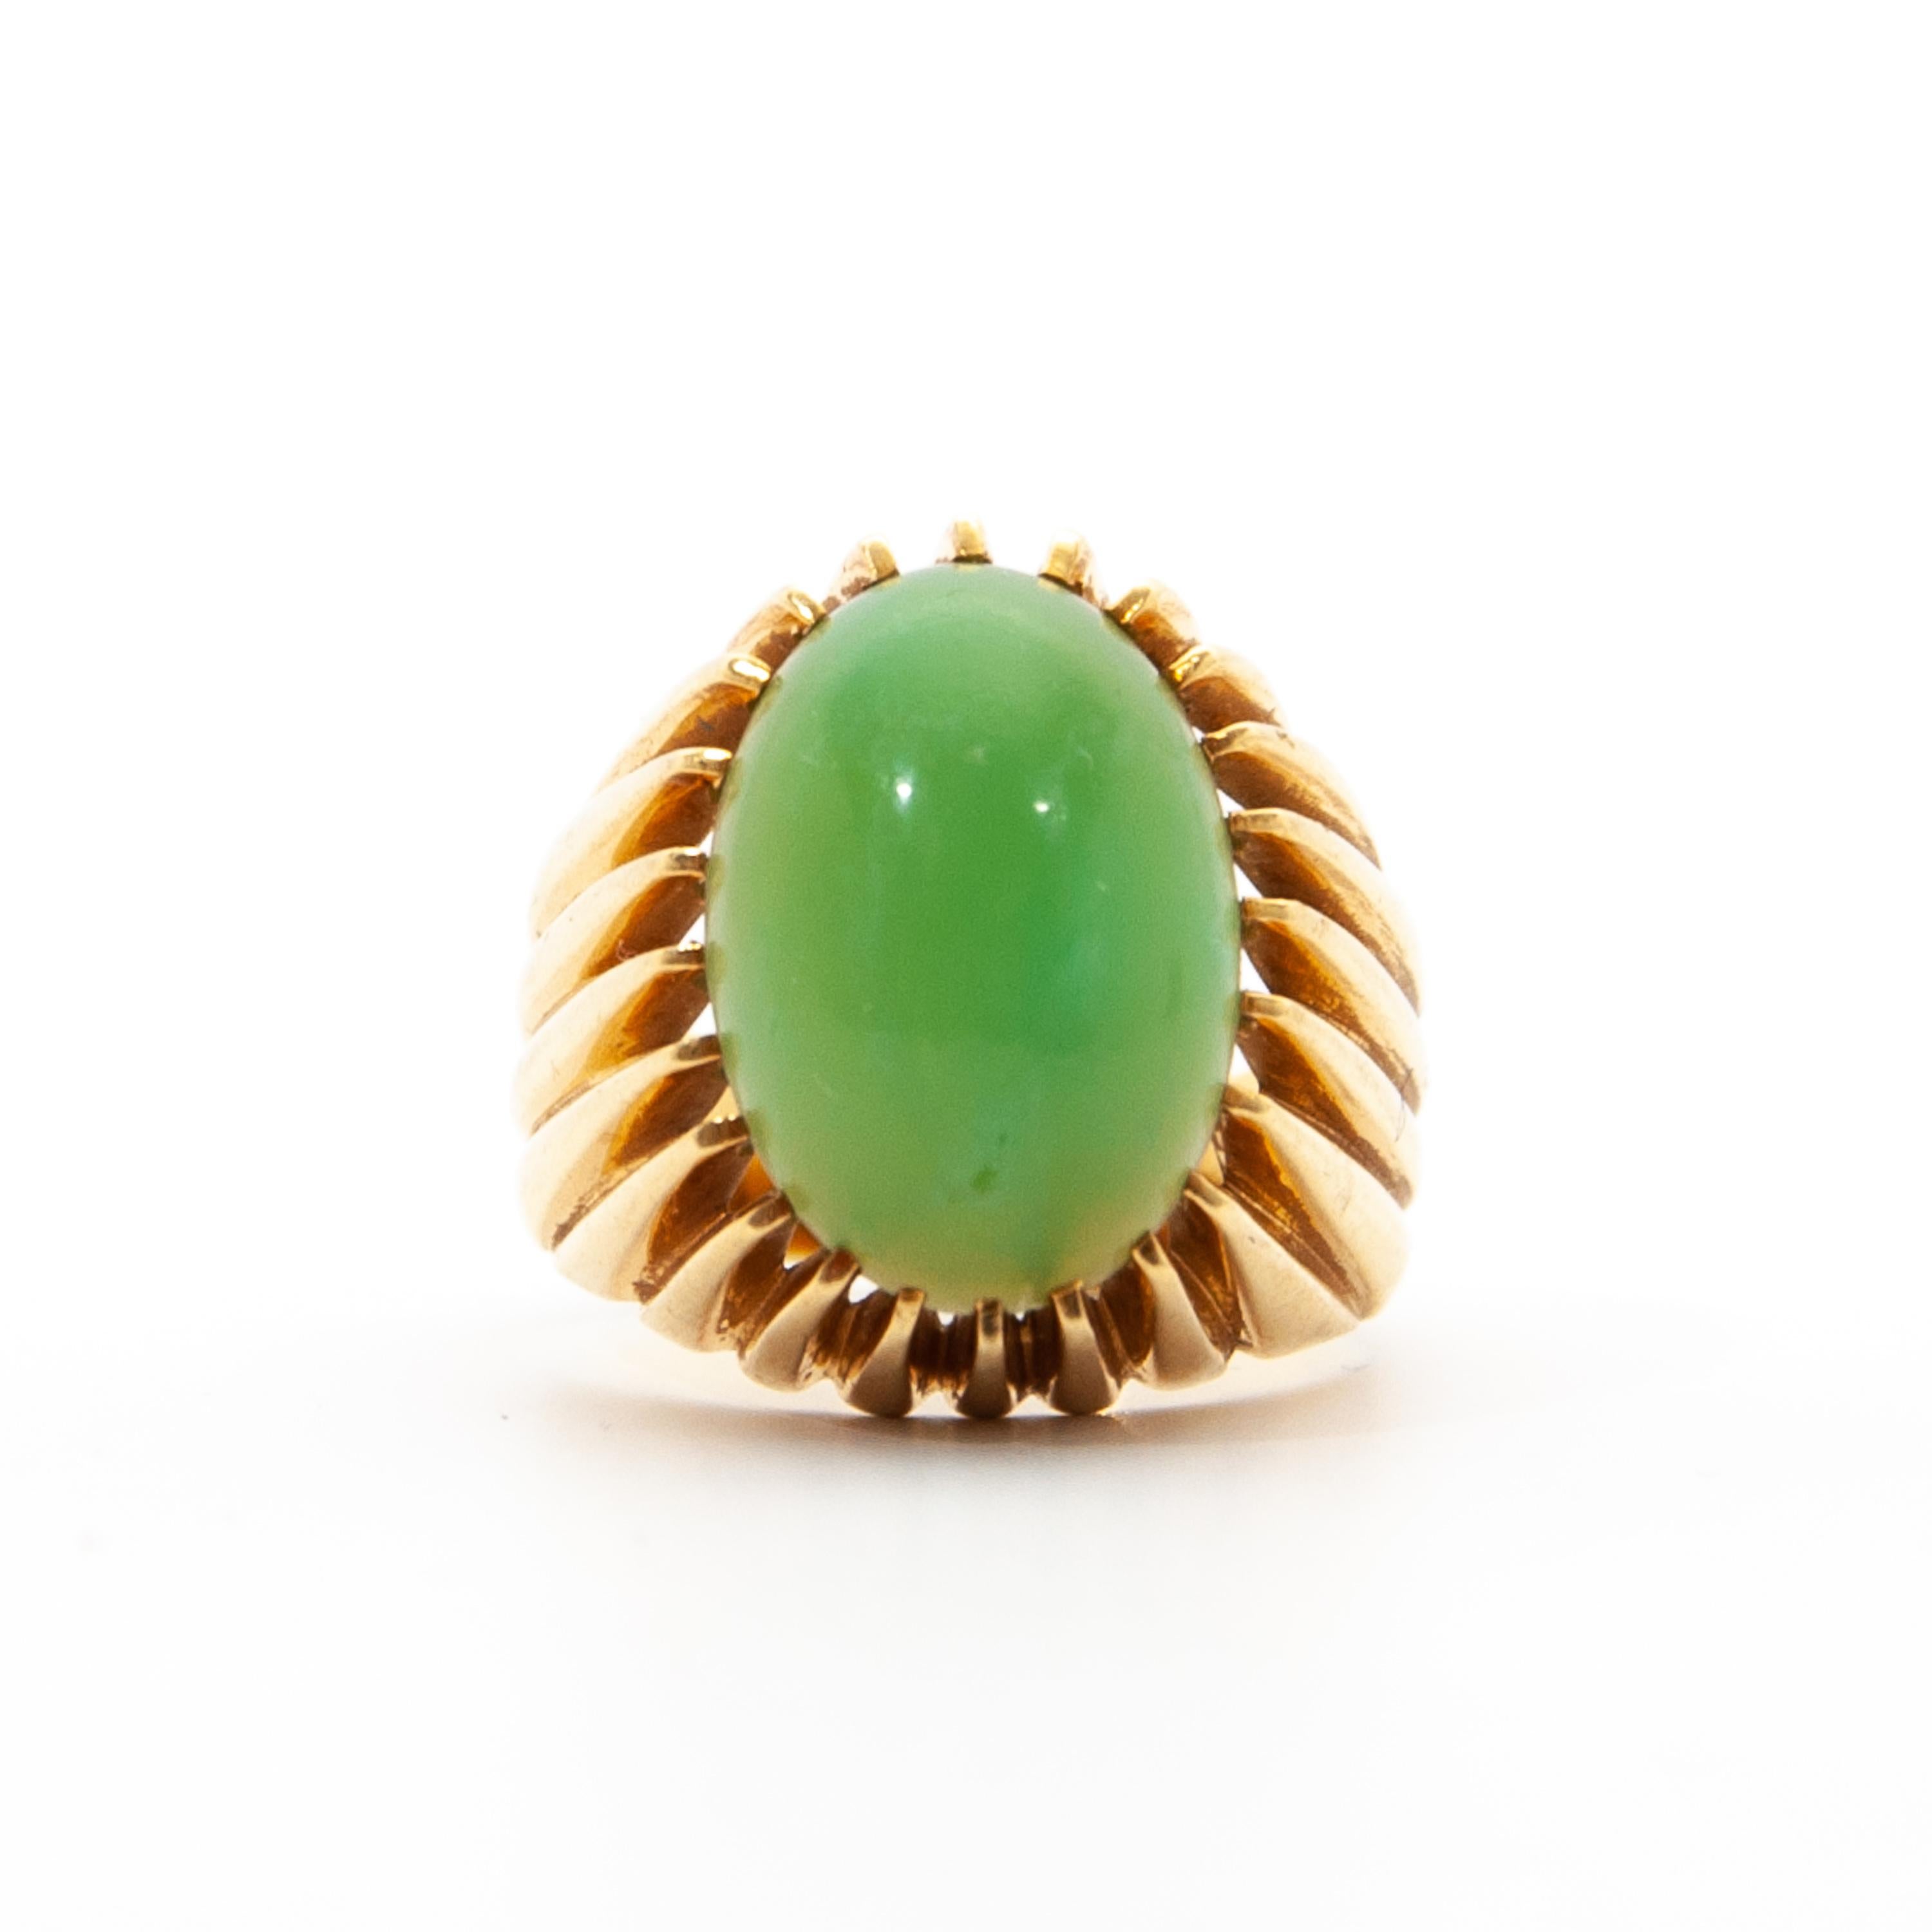 A vintage green chrysoprase ring created in 18 karat gold. The ring is characterized by the beautiful apple green color of this cabochon oval cut chrysoprase stone and the gold openwork vertical bars. The bars are forged into this descending and